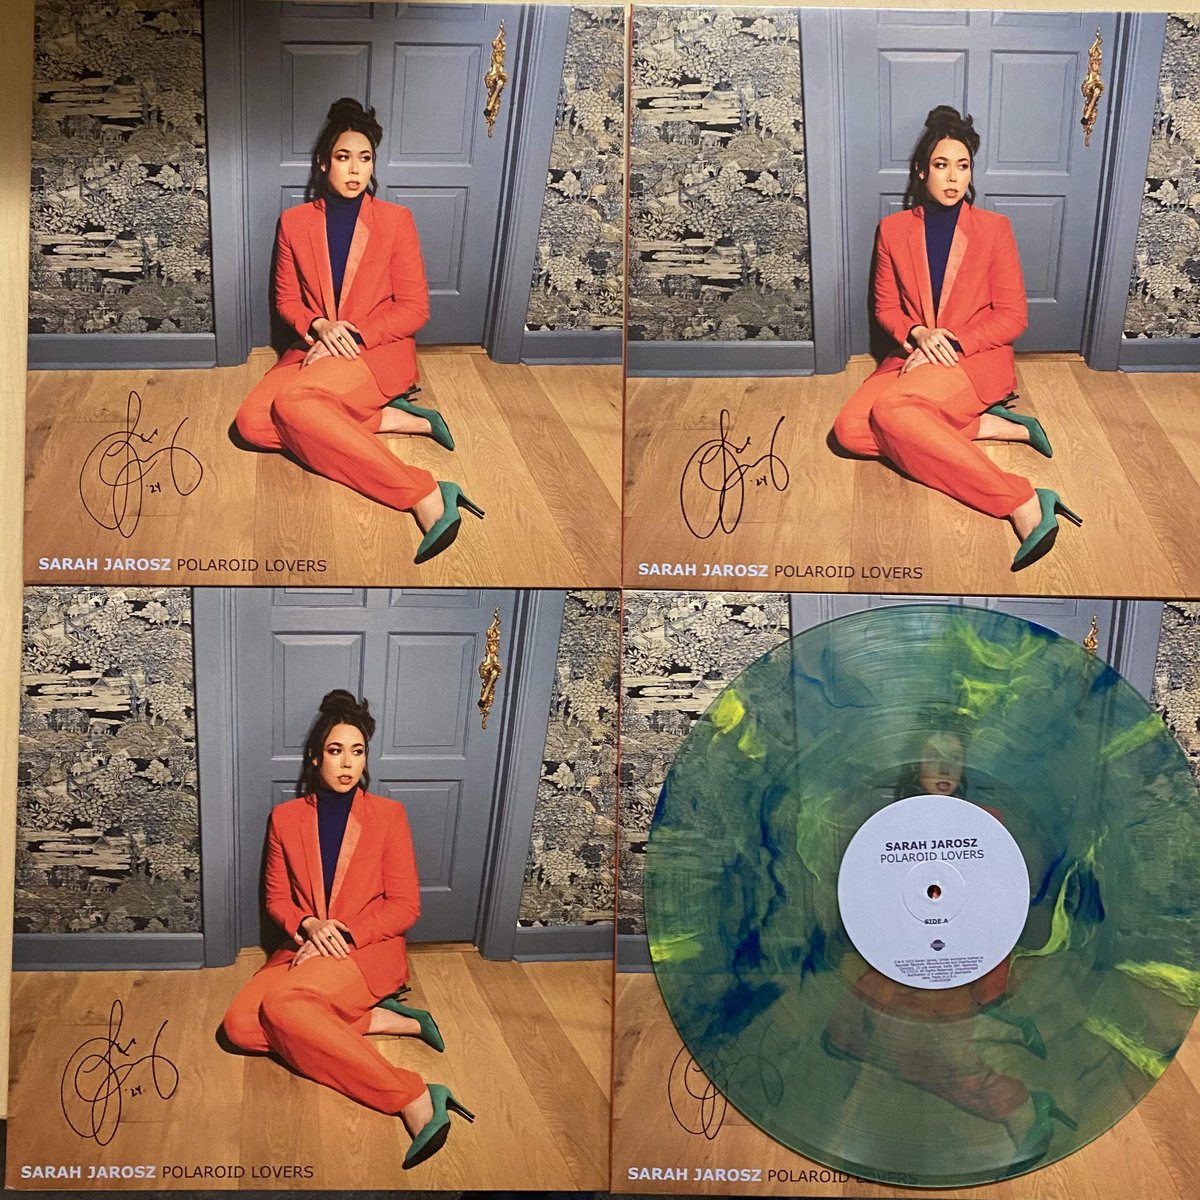 Big thanks to @sarahjarosz for signing copies of Polaroid Lovers indie exclusive blue & green splatter vinyl for us before her @FineLineMPLS show! These will be in our Signed Records Endcap when we open at 10am. We can ship some too. One per person. electricfetus.com/UPC/8880725666…